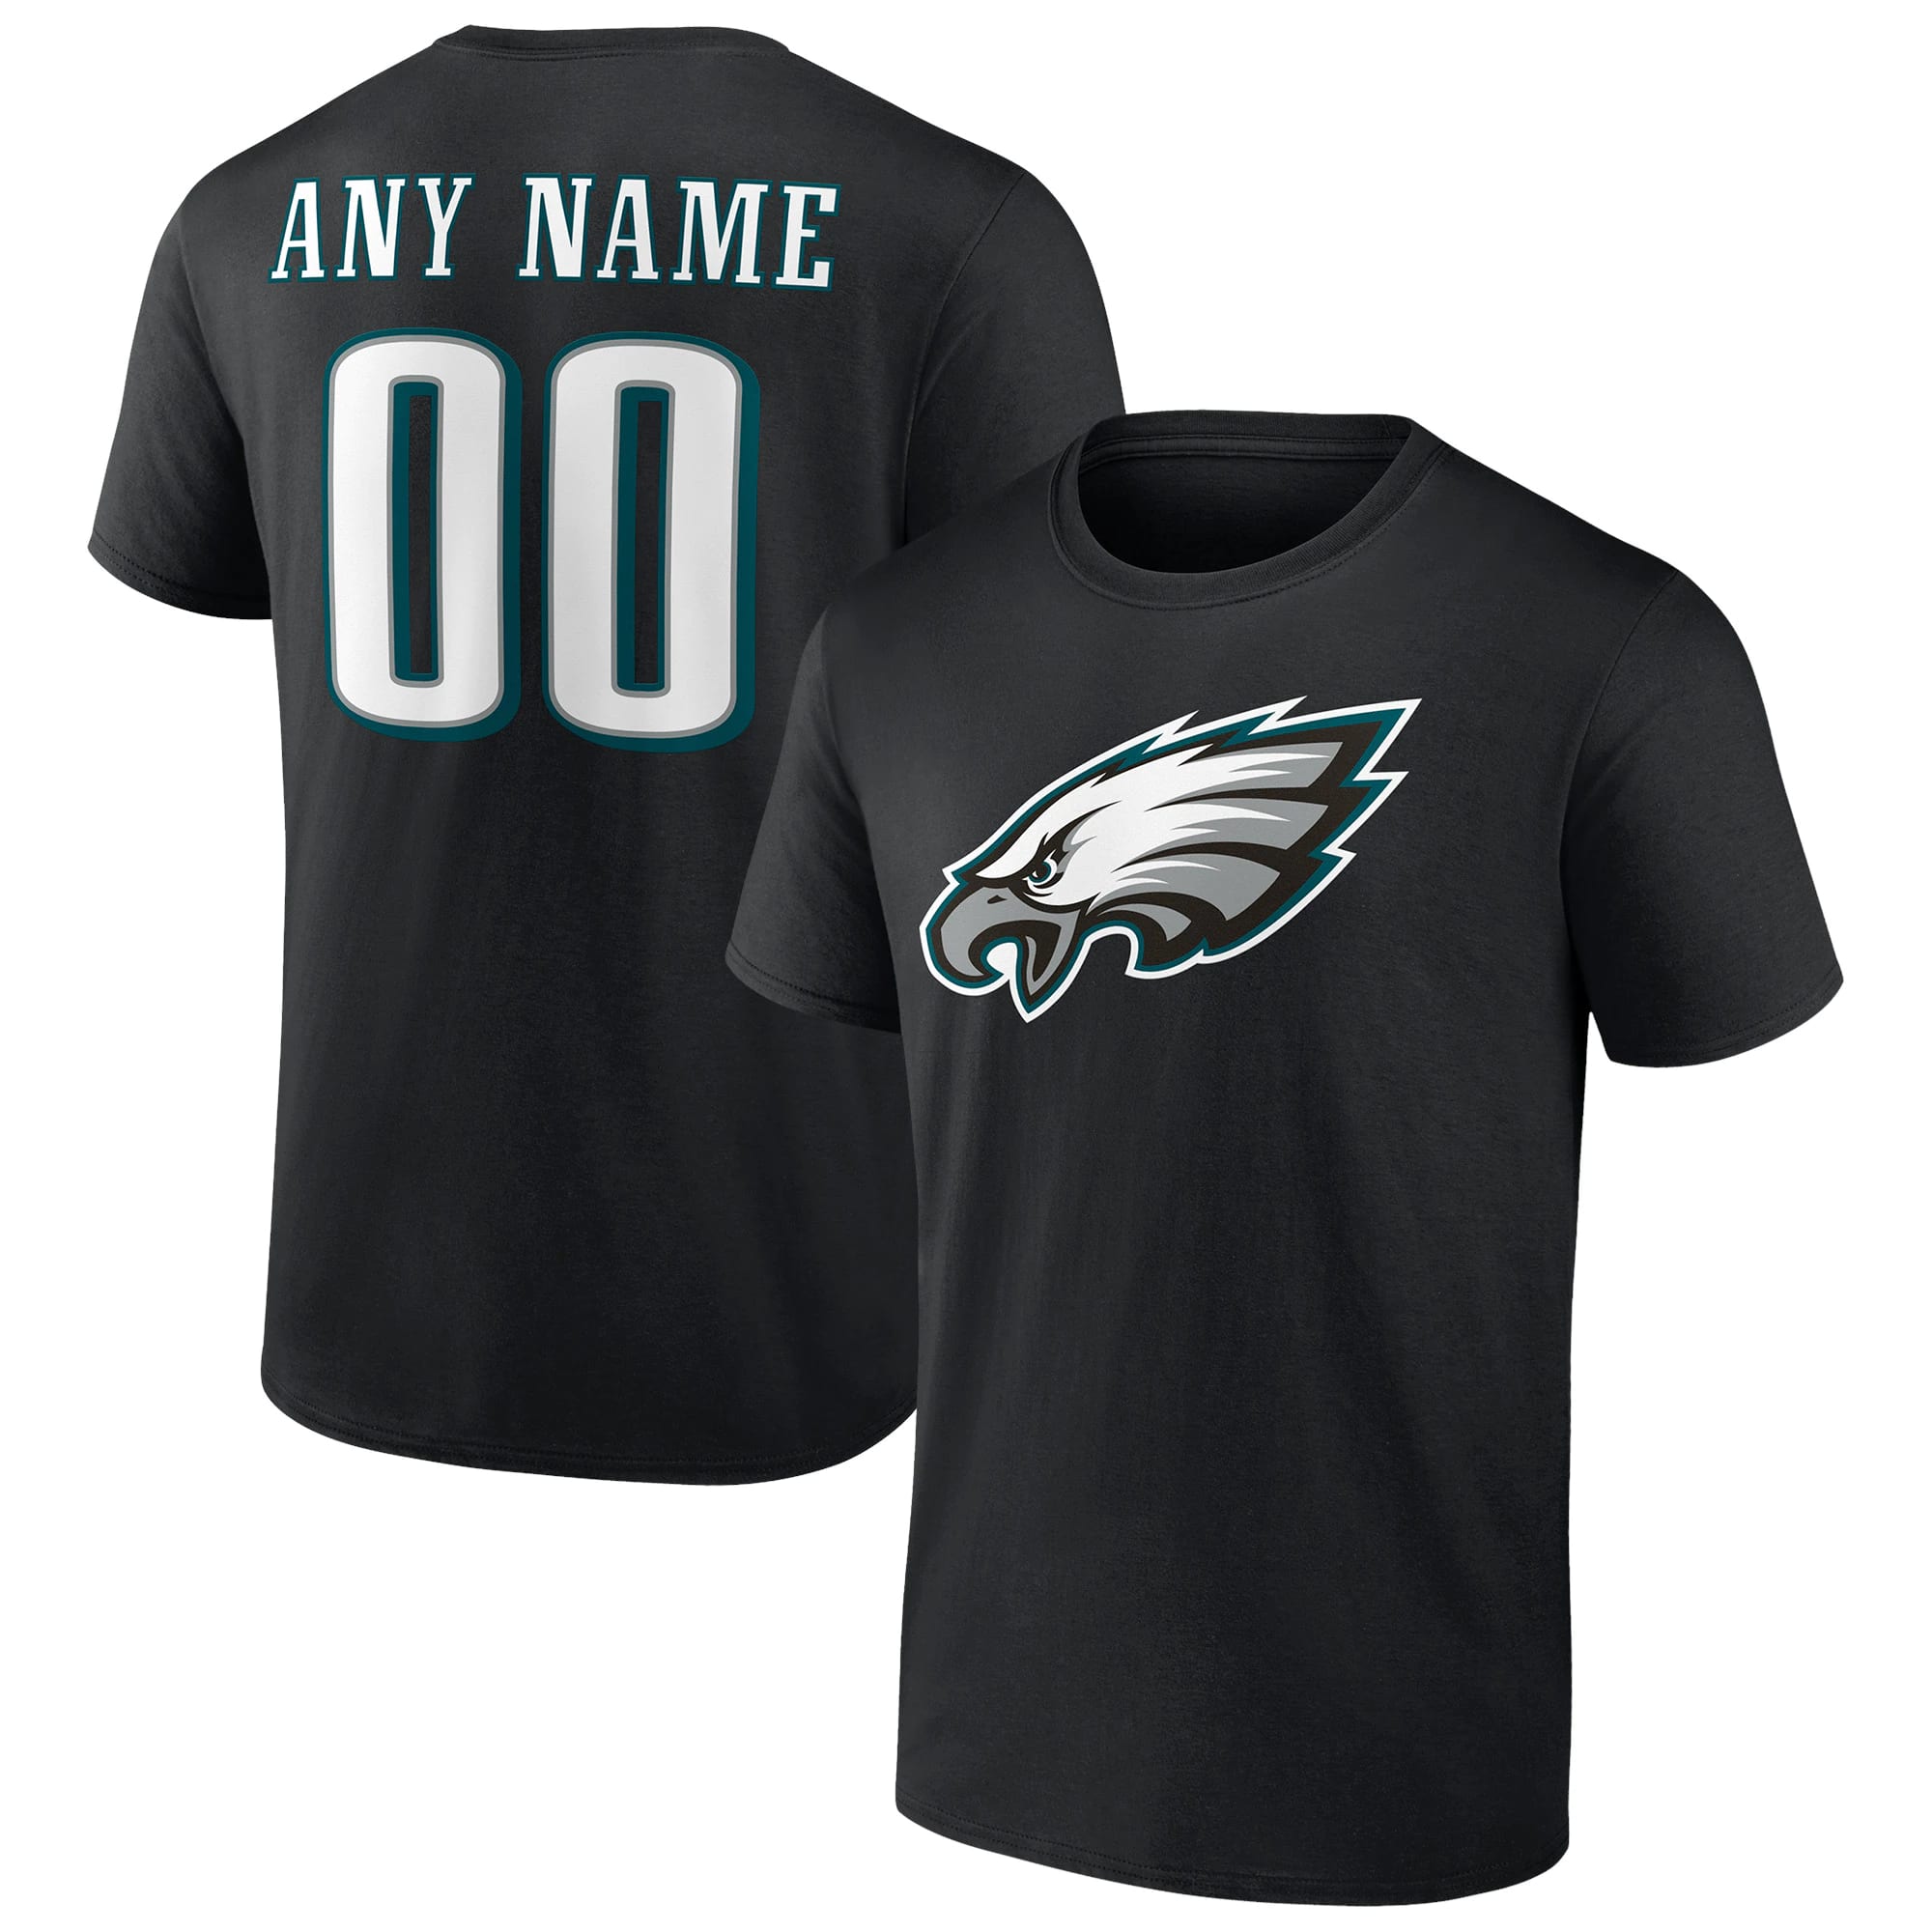 Philadelphia Eagles Fanatics Branded Team Authentic Personalized Name Number Black T Shirt